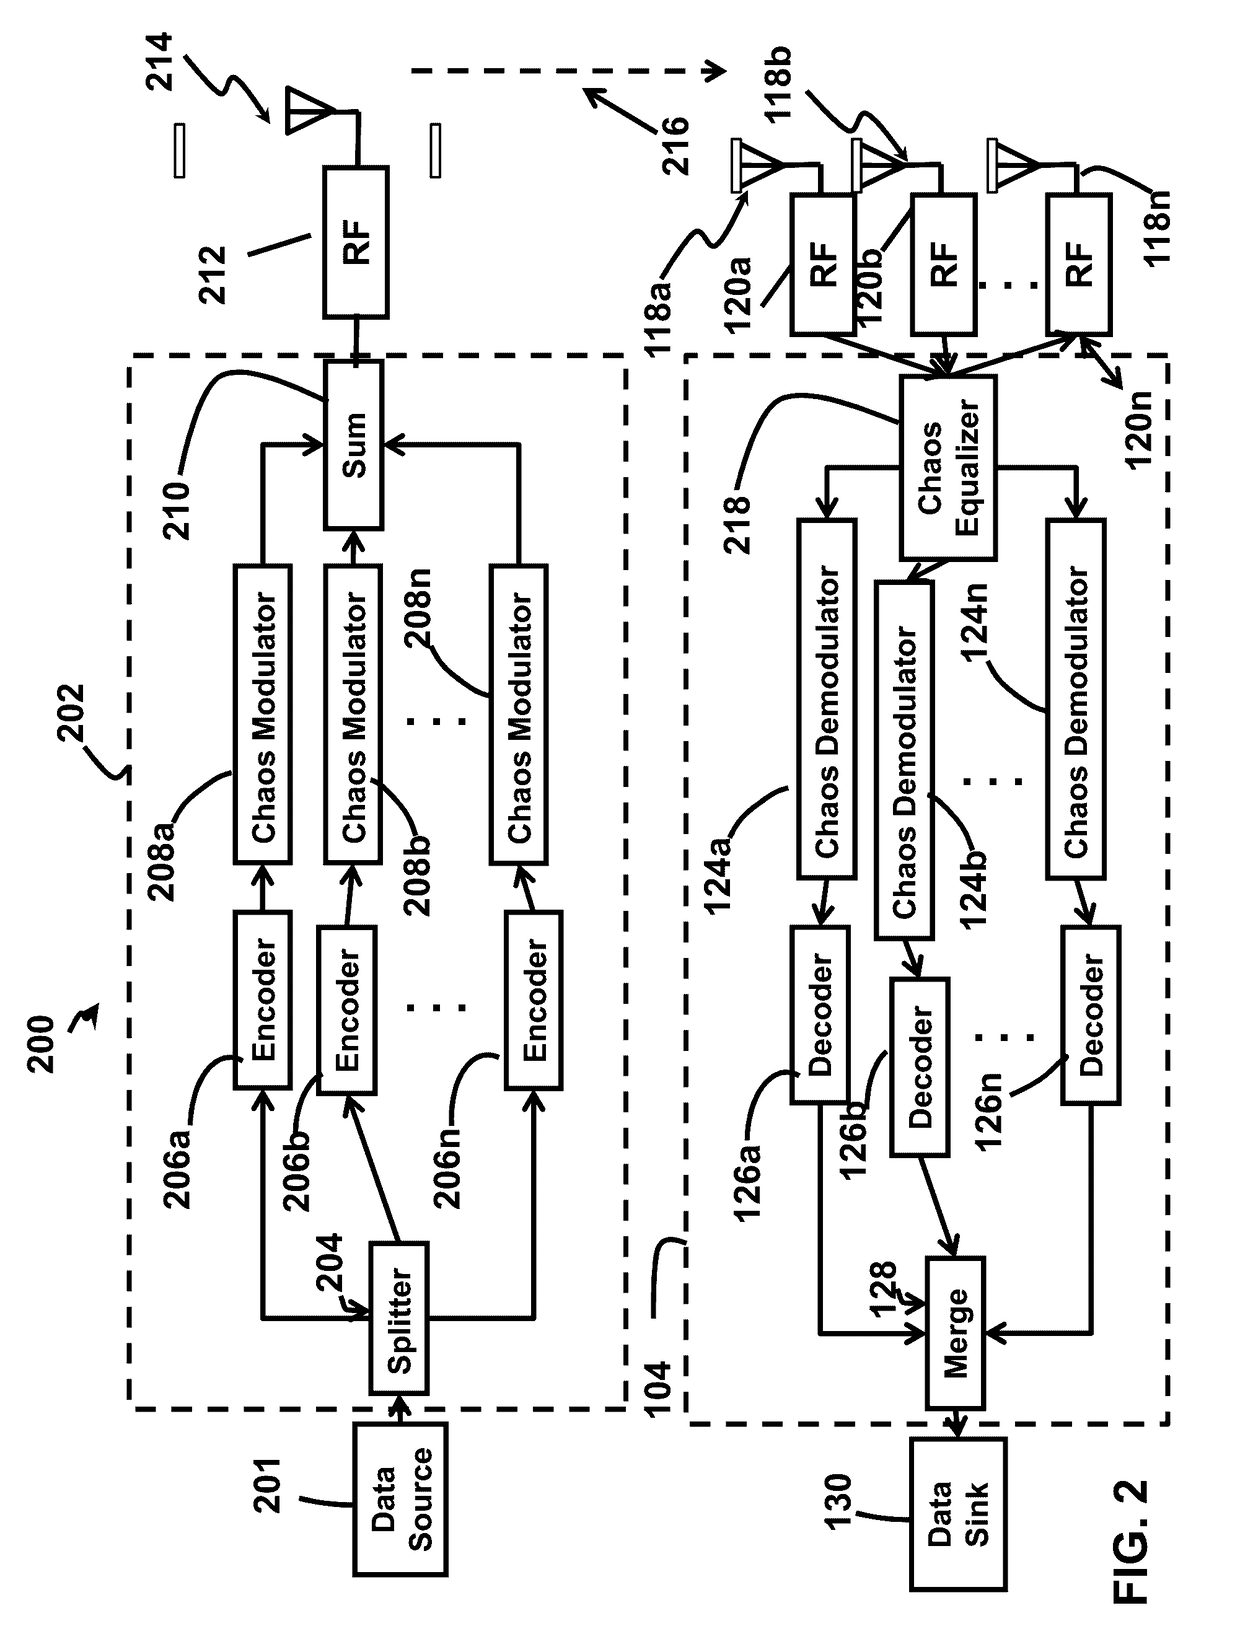 Method and Apparatus for Range and Coverage Extension in a Heterogeneous Digital Chaos Cooperative Network